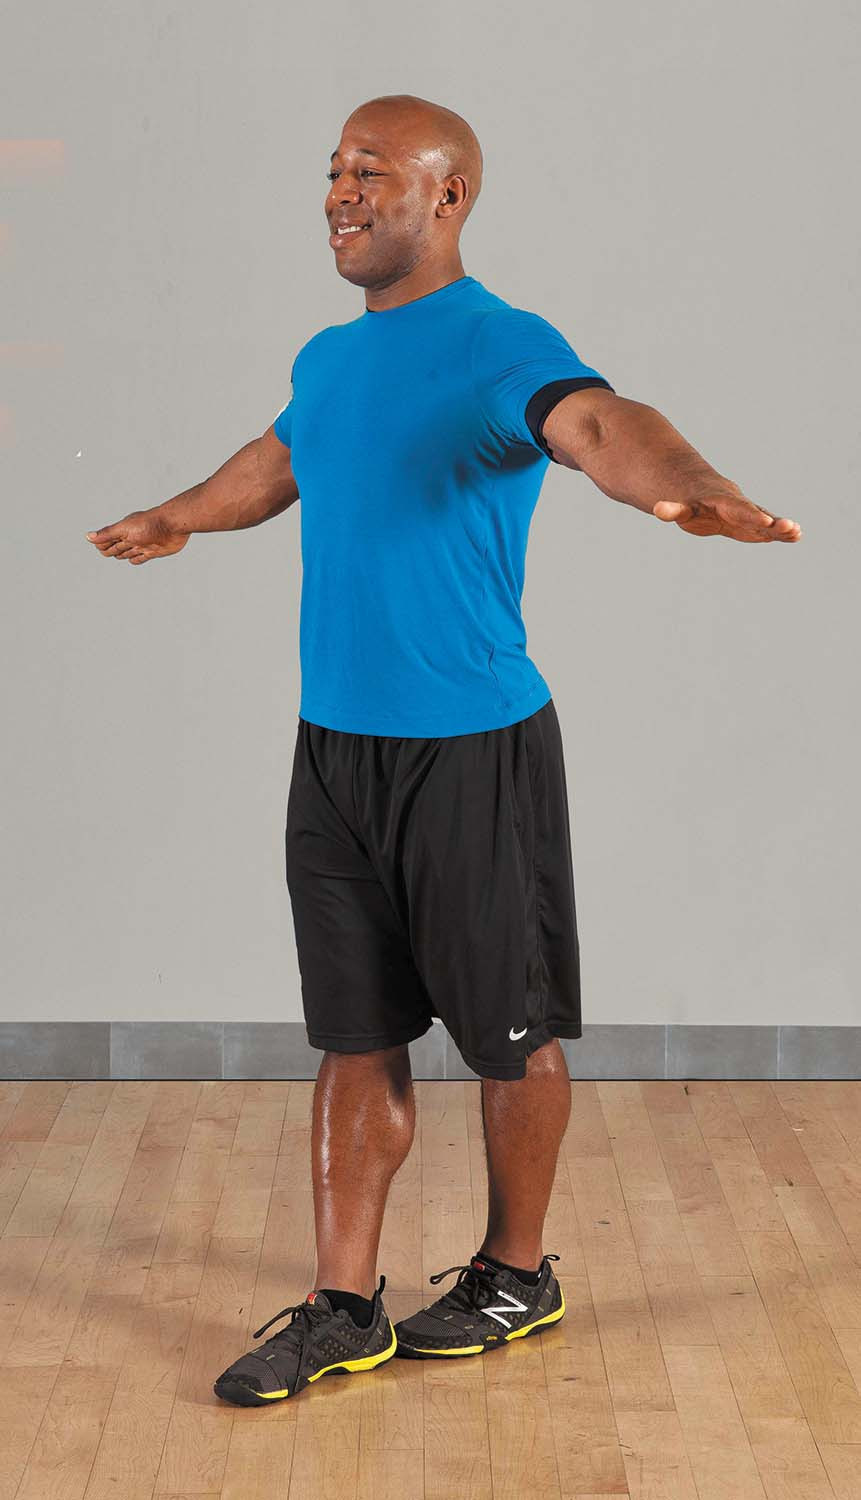 photo of a man performing the heel toe standing (no support) exercise as described in the article